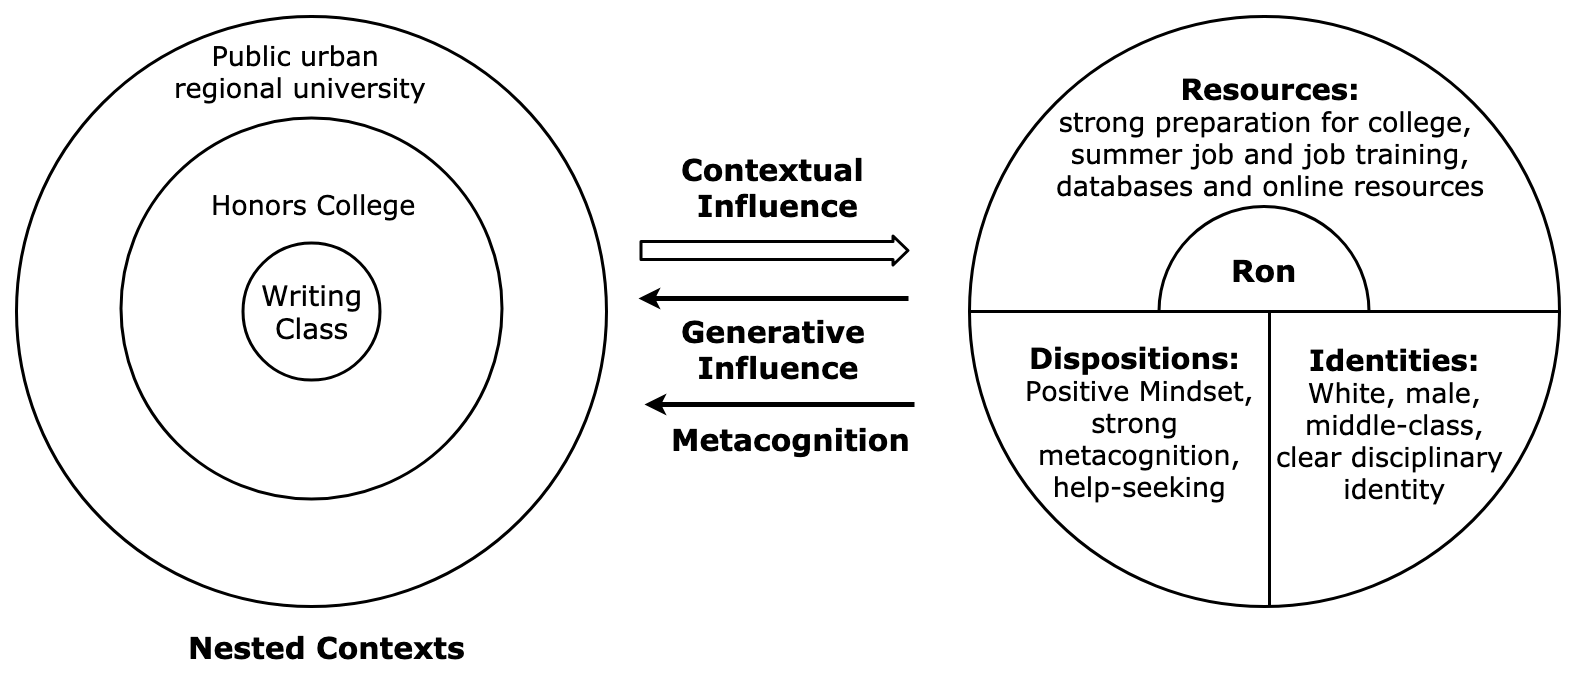 This figure shows Ron's developmental moments from Year 1 to Year 3. On the left are three nested circles that are marked with 'writing class,' 'honors college,' and 'public urban regional university.' On the right is a circle that represents the person. Specifically in the person circle, a half circle in the center represents the core and is marked with 'Ron'; the upper half-circle ring is marked as 'Resources: Strong preparation for college, summer job and job training, databases and online resources'; the lower half of the person circle is divided equally into two halves, one is marked with 'Dispositions: Positive mindset, strong metacognition, help-seeking' and the other with 'Identities: White, male, middle-class, clear disciplinary identity.' Between the nested contexts circles and the person circle are three arrows. On the top is an arrow pointing at the right, with 'Contextual Influence' written above it; in the middle is an arrow pointing at the left, with 'Generative Influence' written beneath it; on the bottom is an arrow pointing at the left, with 'Metacognition' written beneath it. 